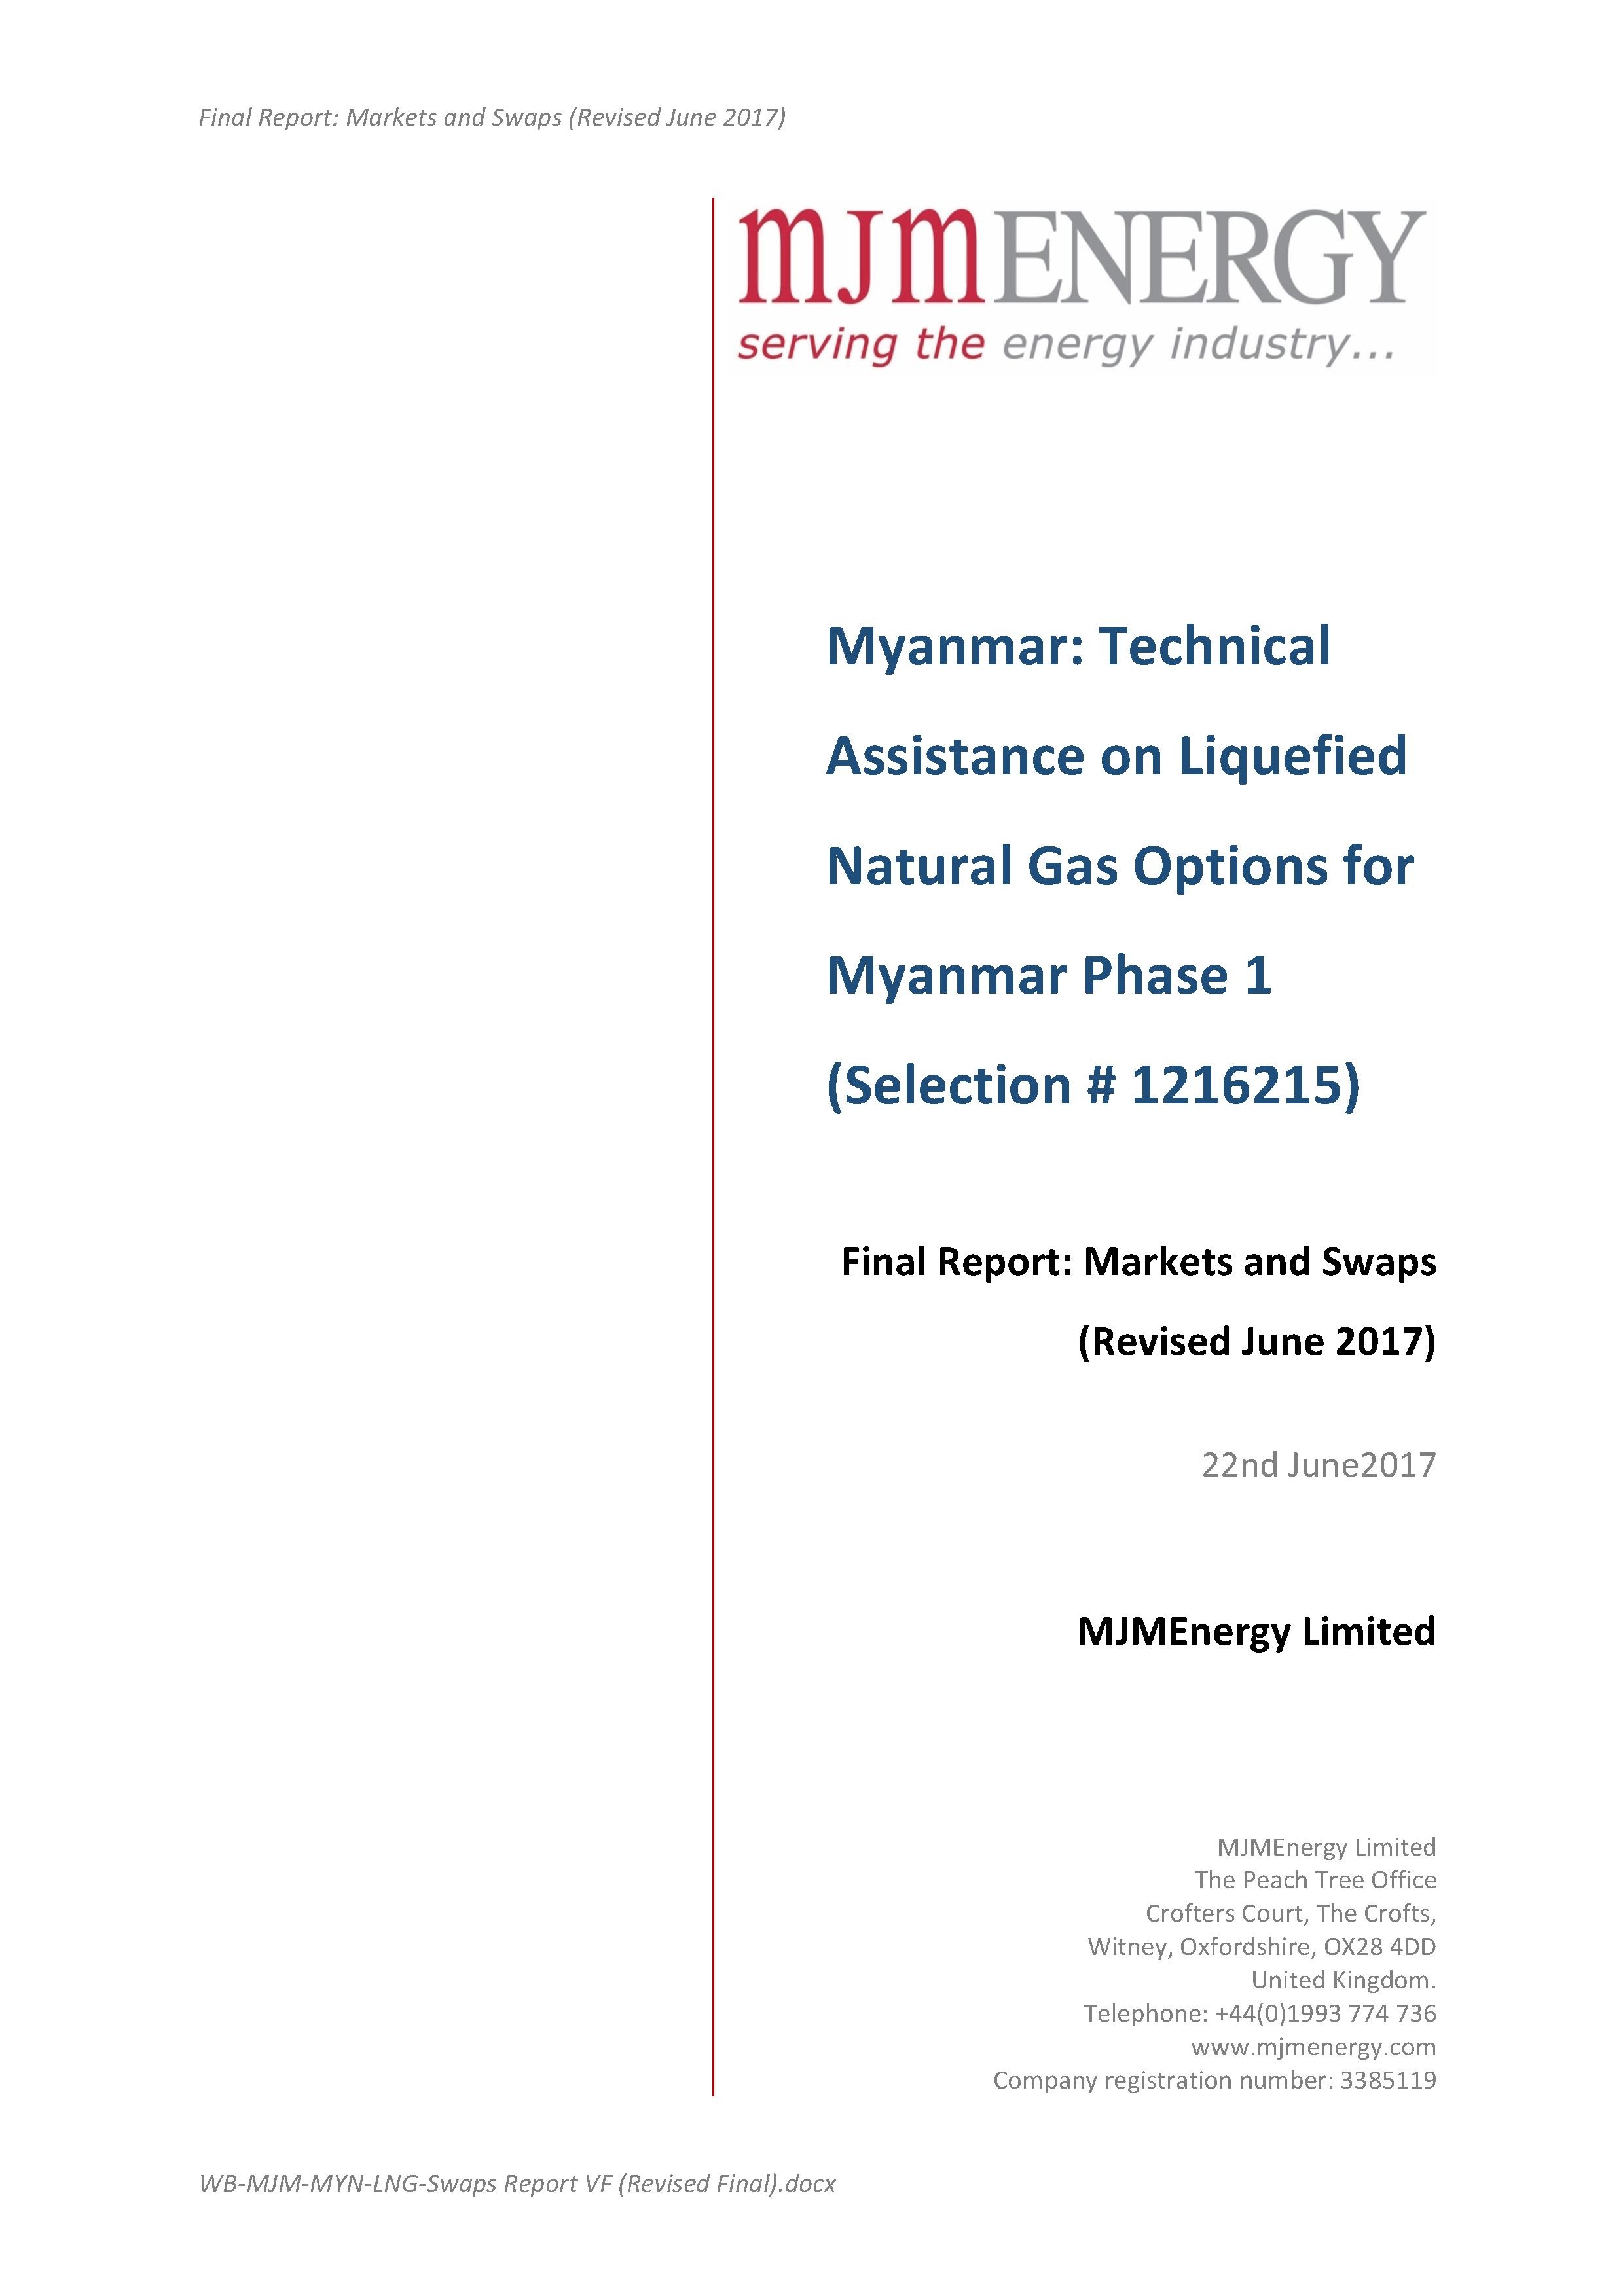 Report on Market and Swaps (MJMEnergy Limited)